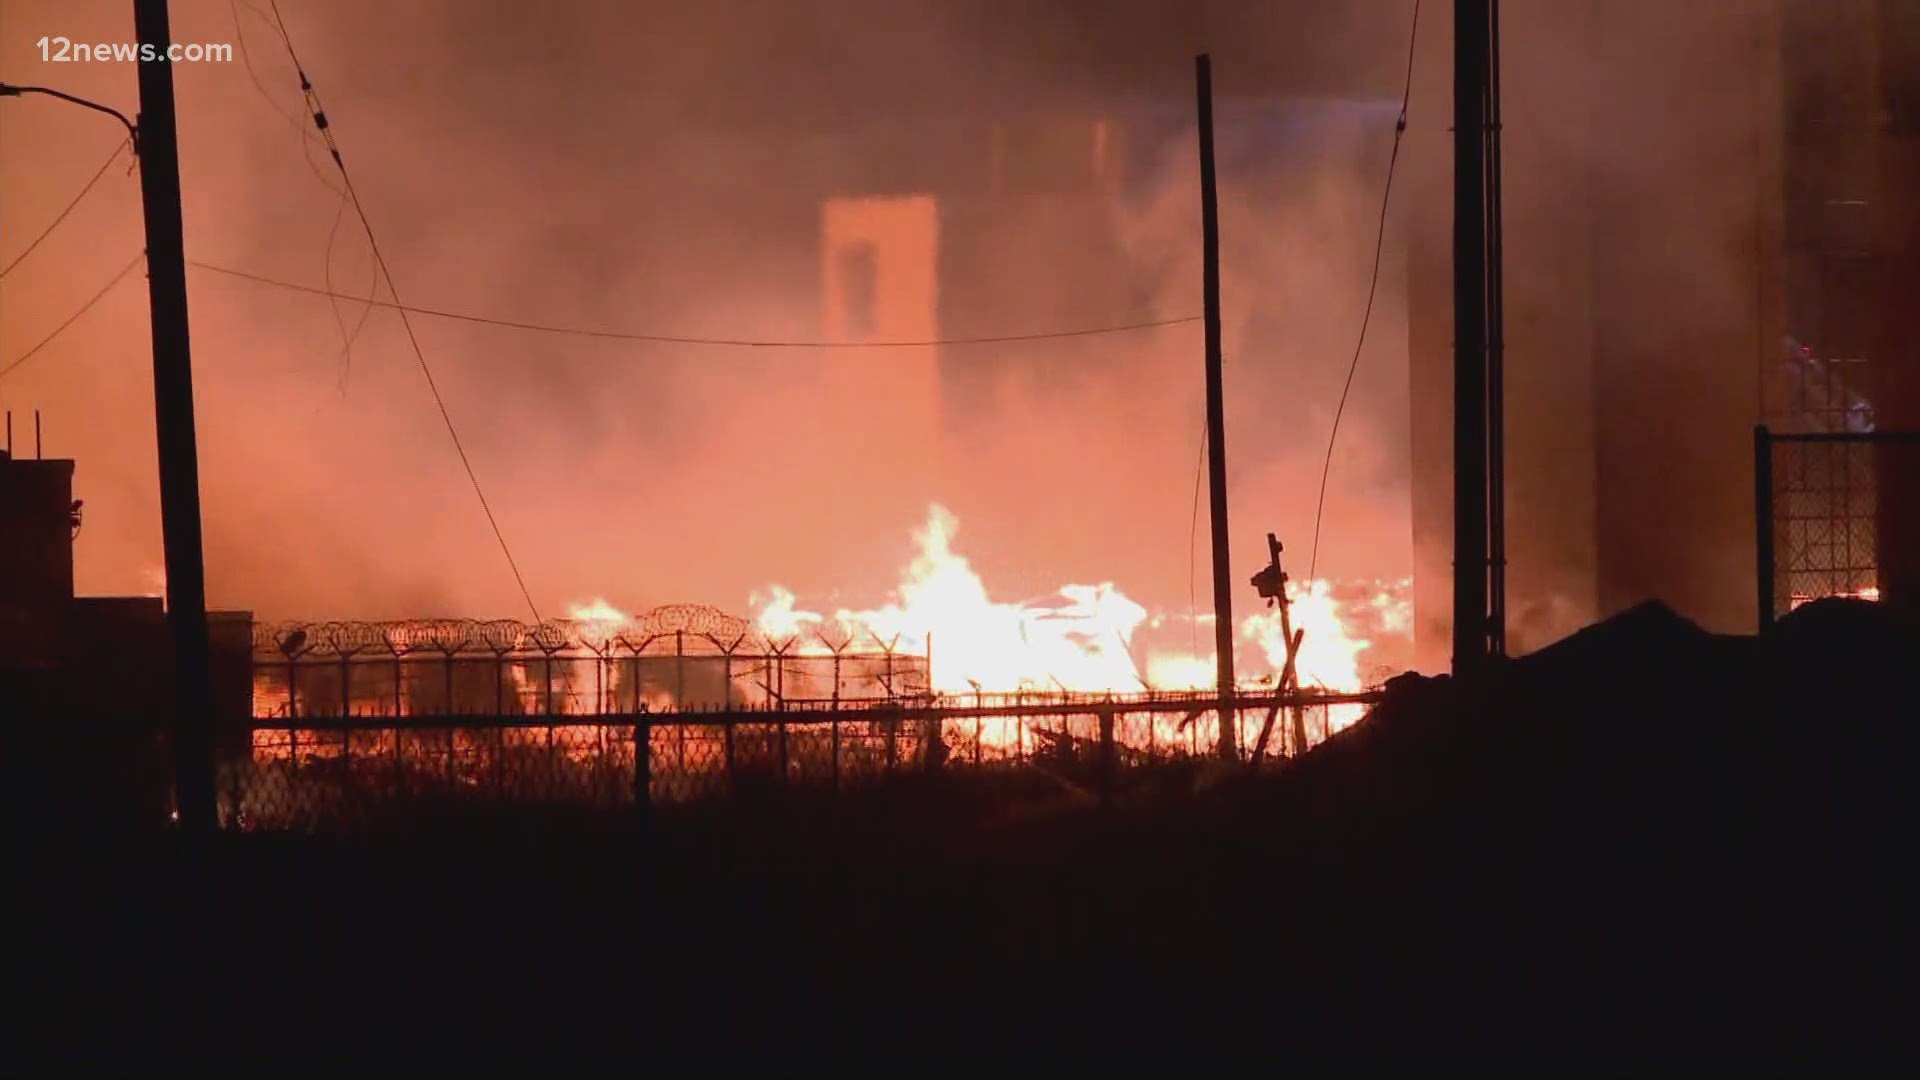 A fire broke out at a building under construction in the downtown Phoenix area Sunday night.